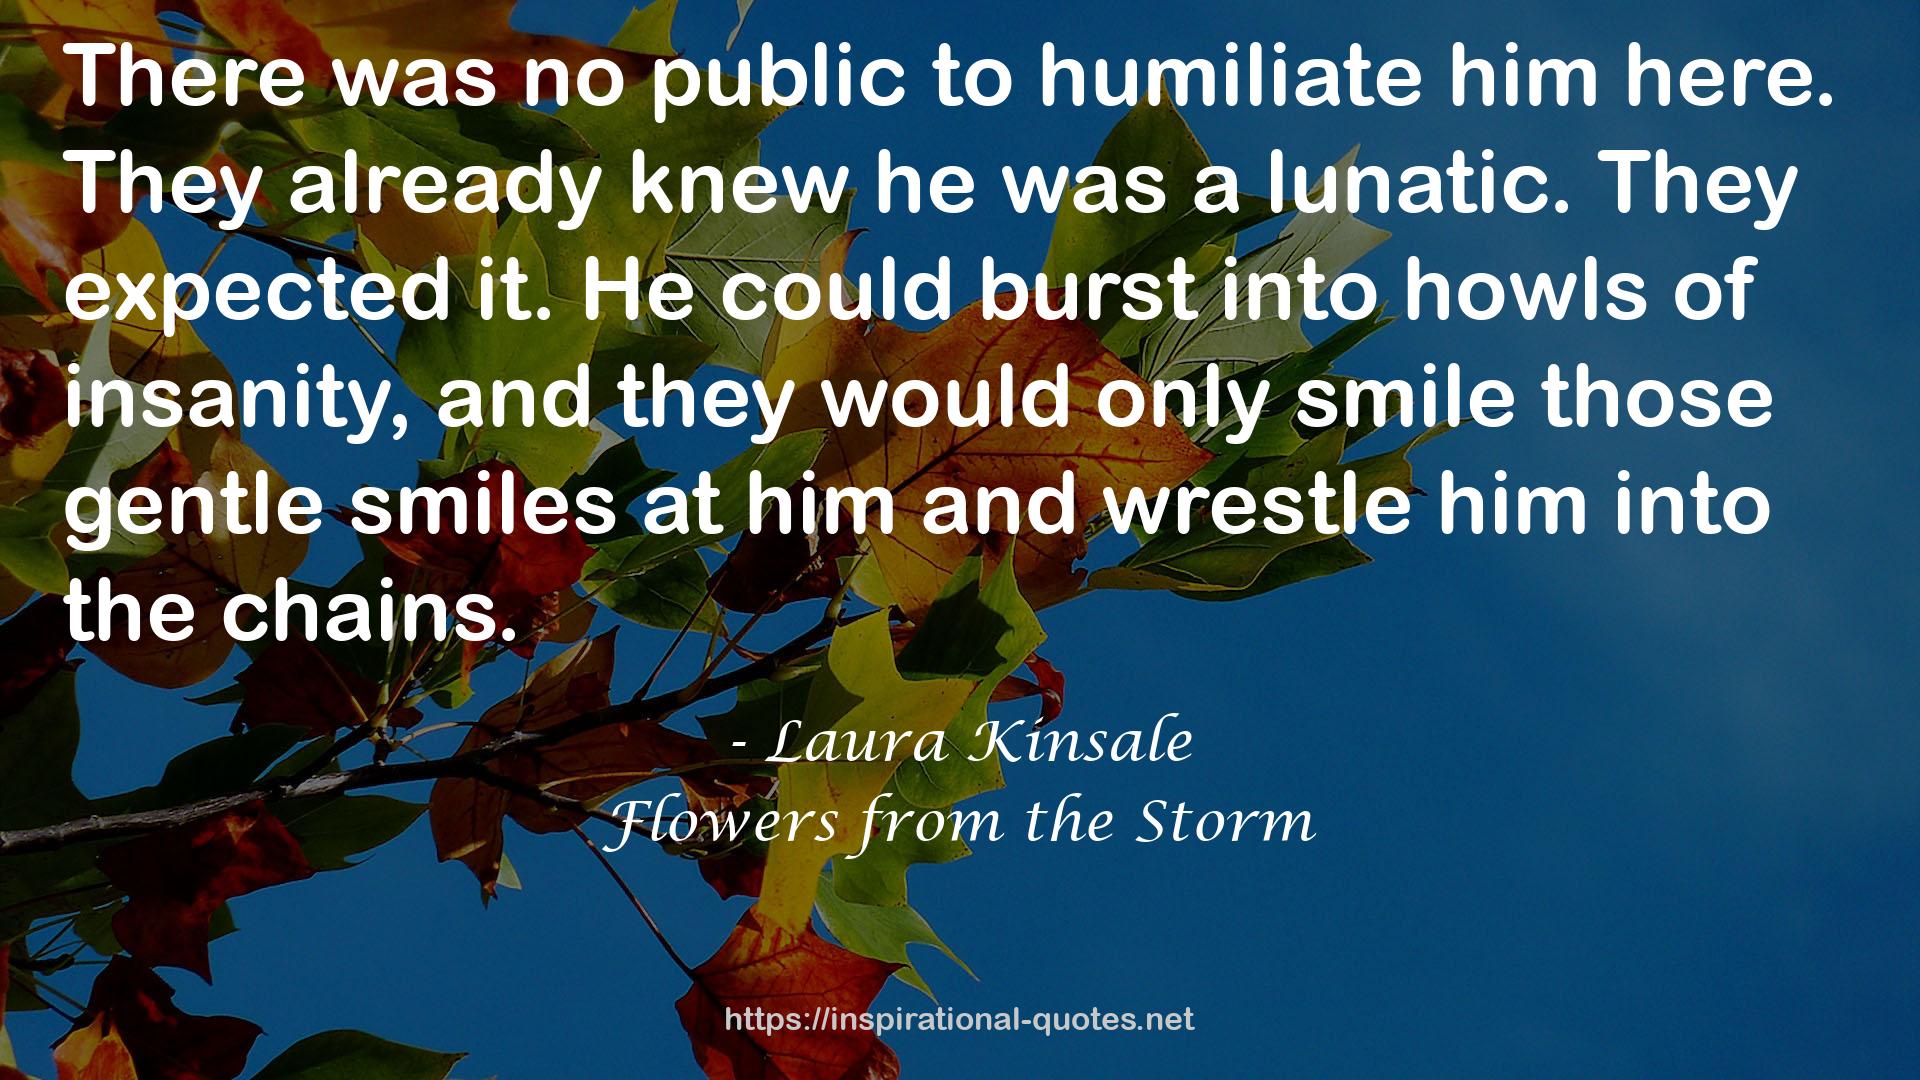 Flowers from the Storm QUOTES